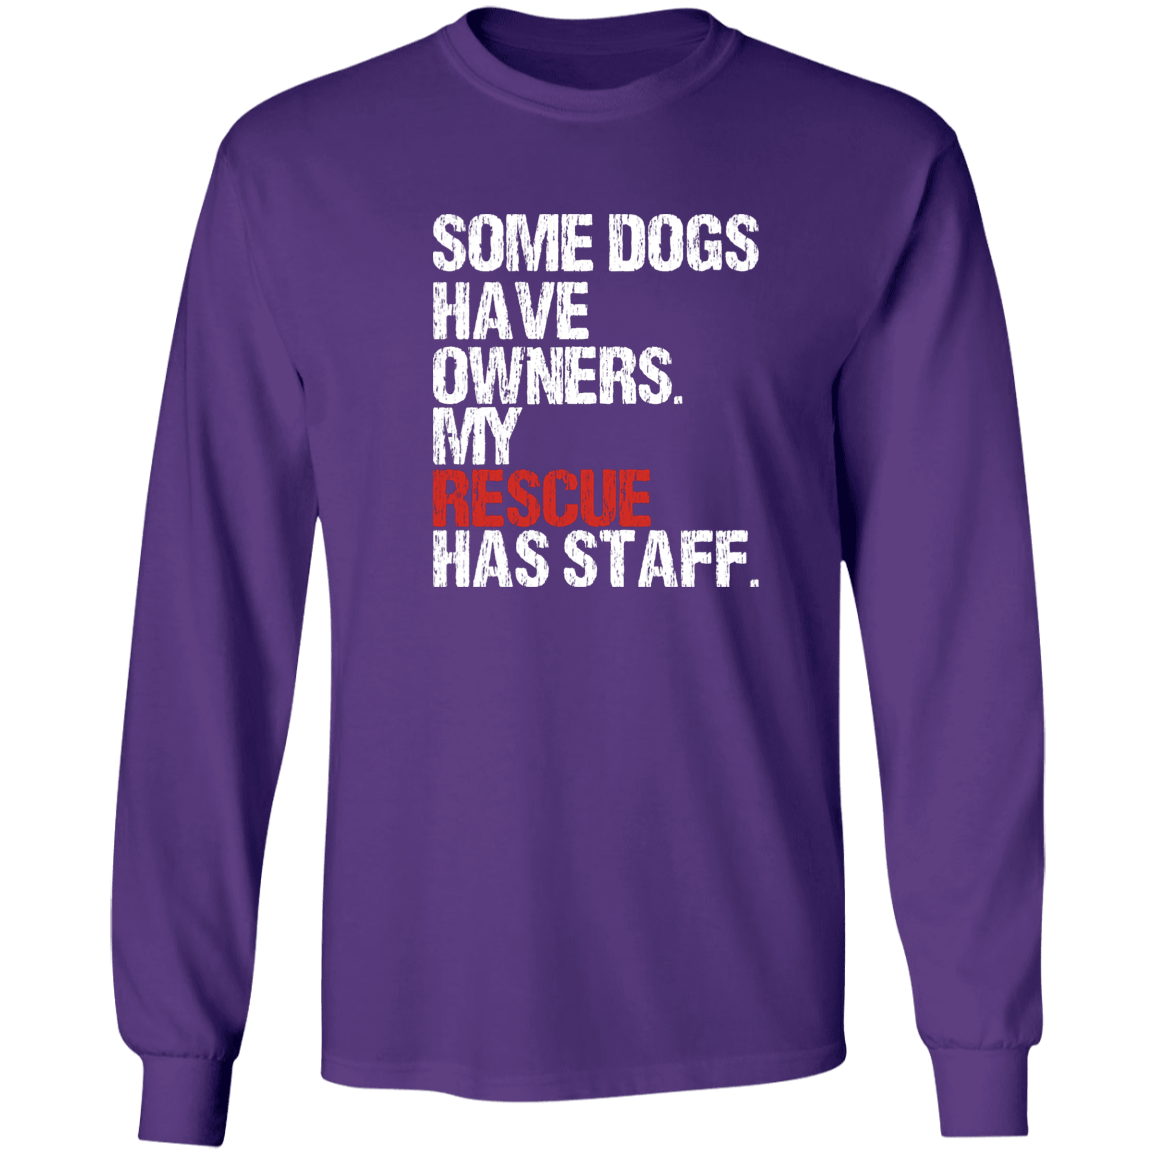 Some Dogs Have Owners - Long Sleeve T Shirt.